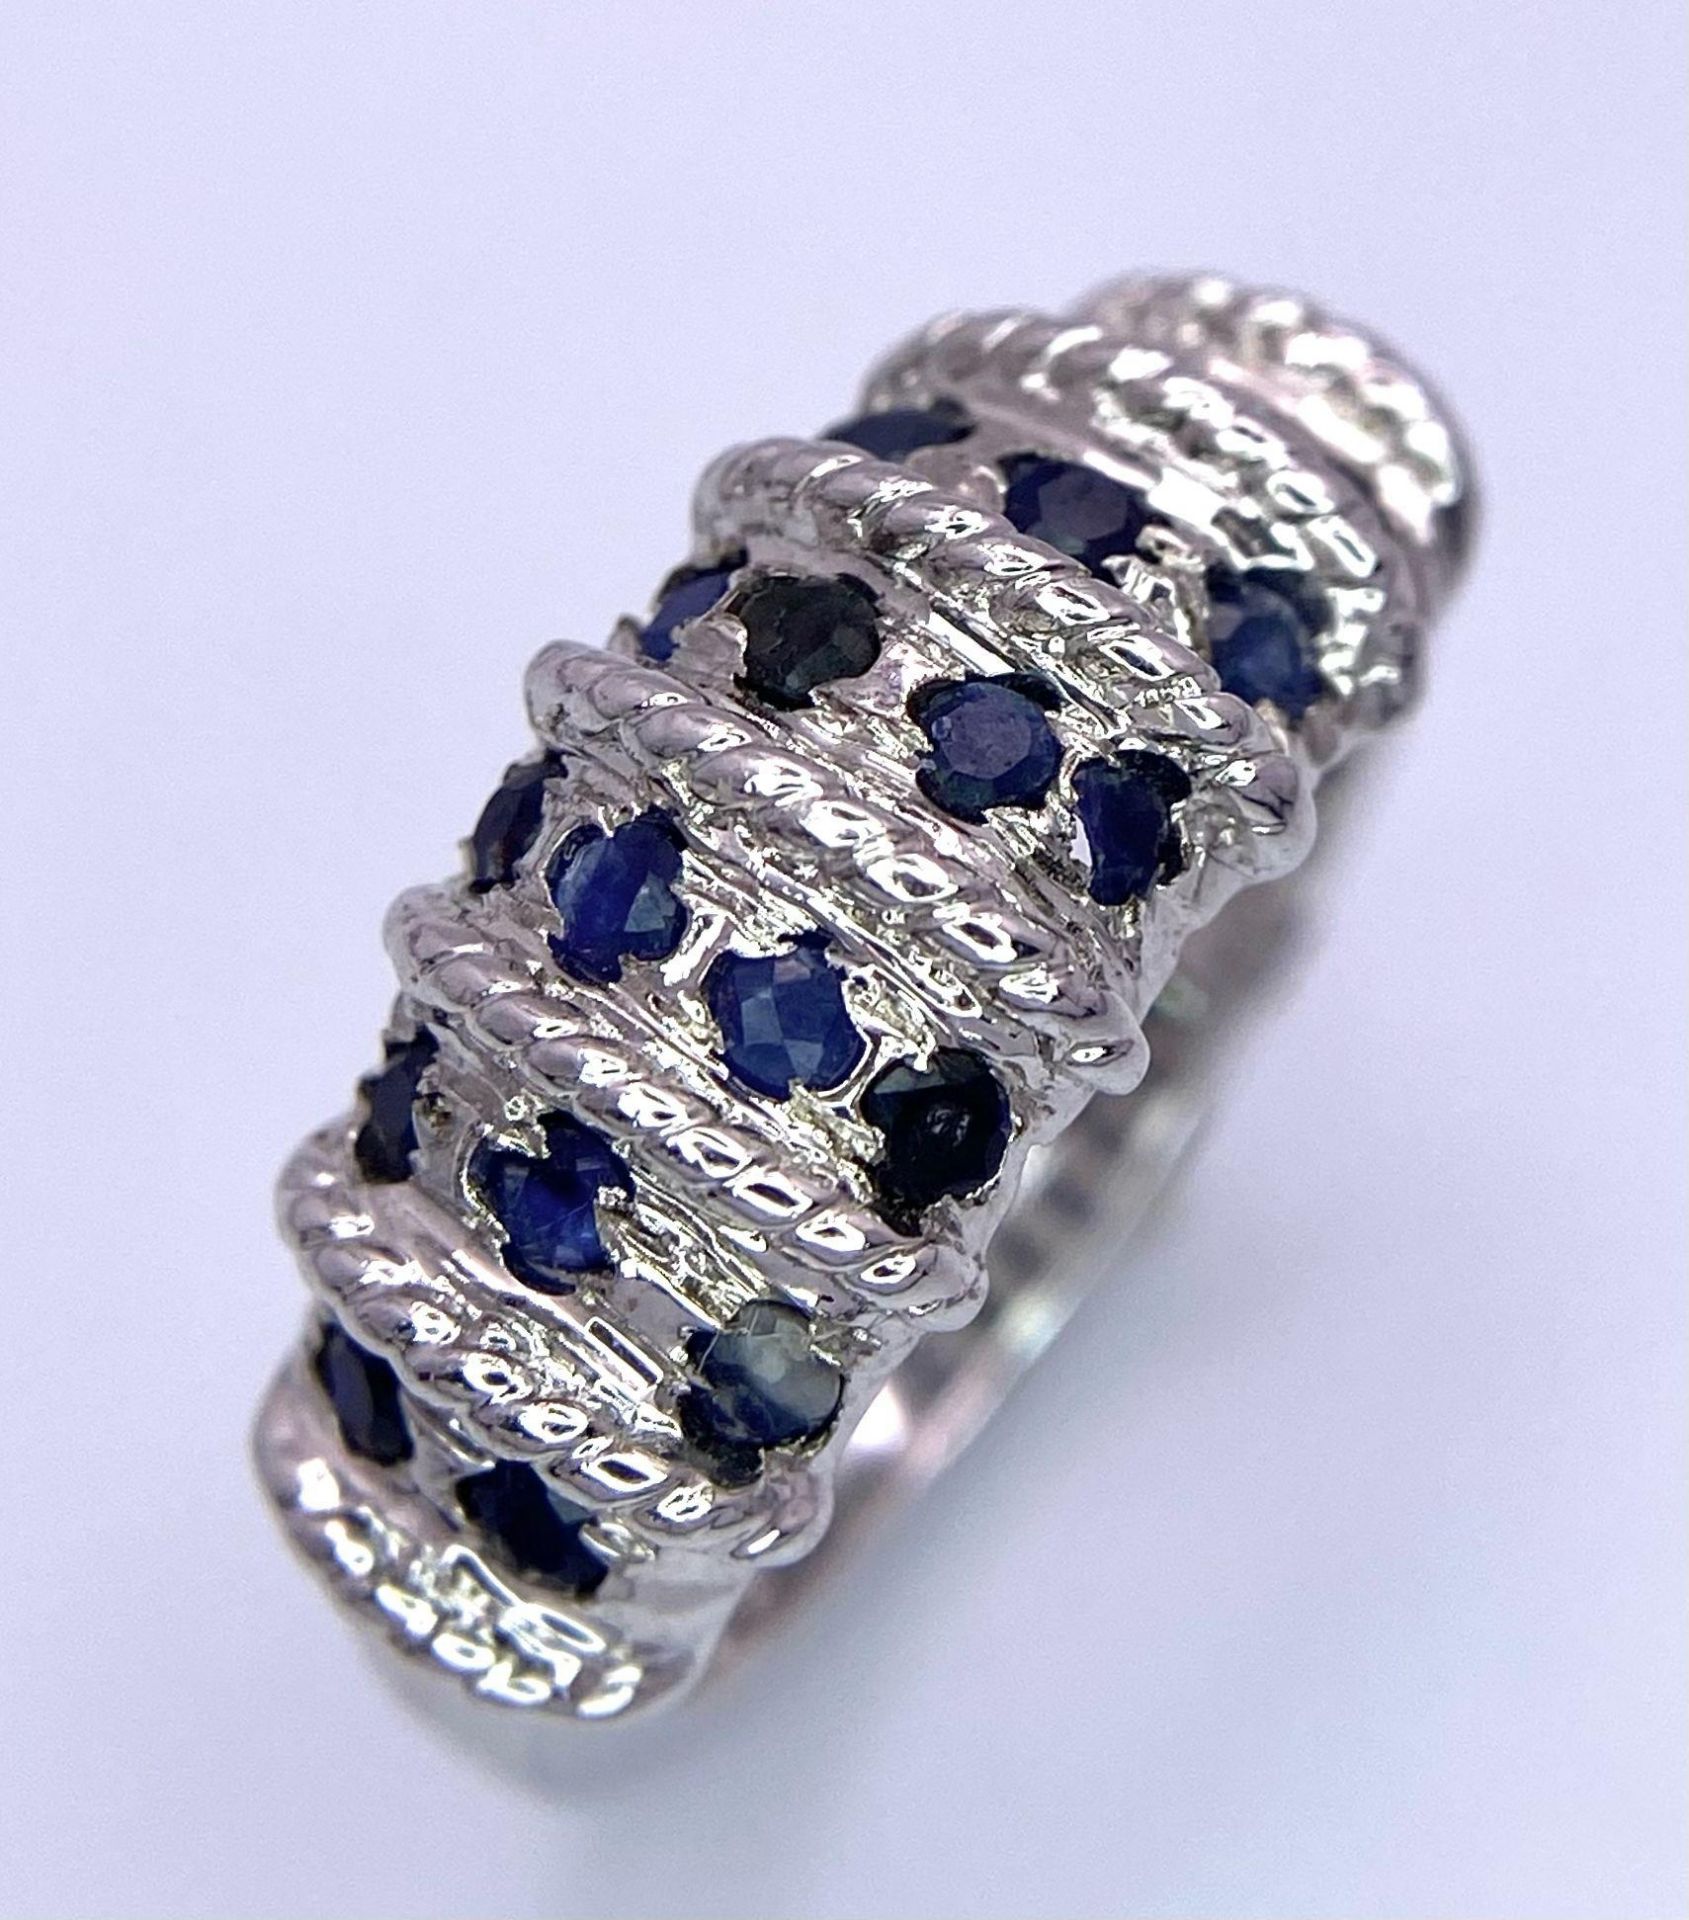 A Graduating Vertical Band Sapphire 925 Silver Ring. Sapphires - 2ctw. 4.77g total weight. Size M.